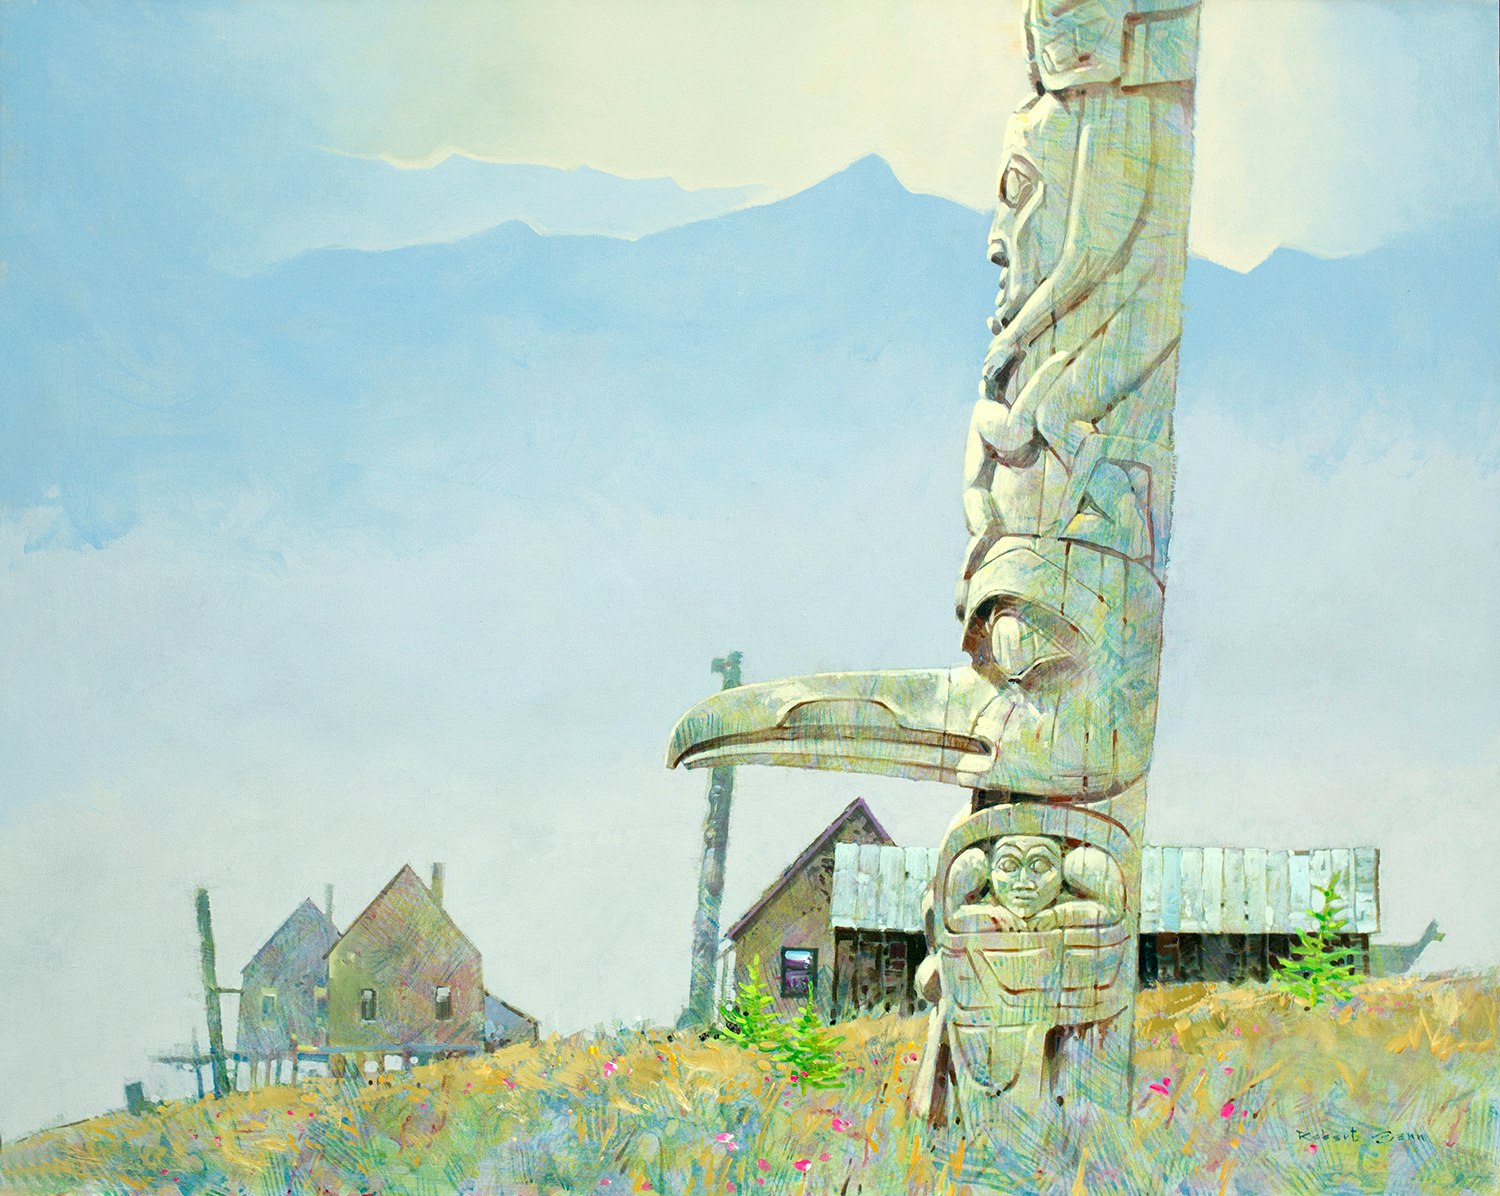 Morning - The Deserted Village by Robert Genn, 1989 Oil on Canvas - (48x60 in)